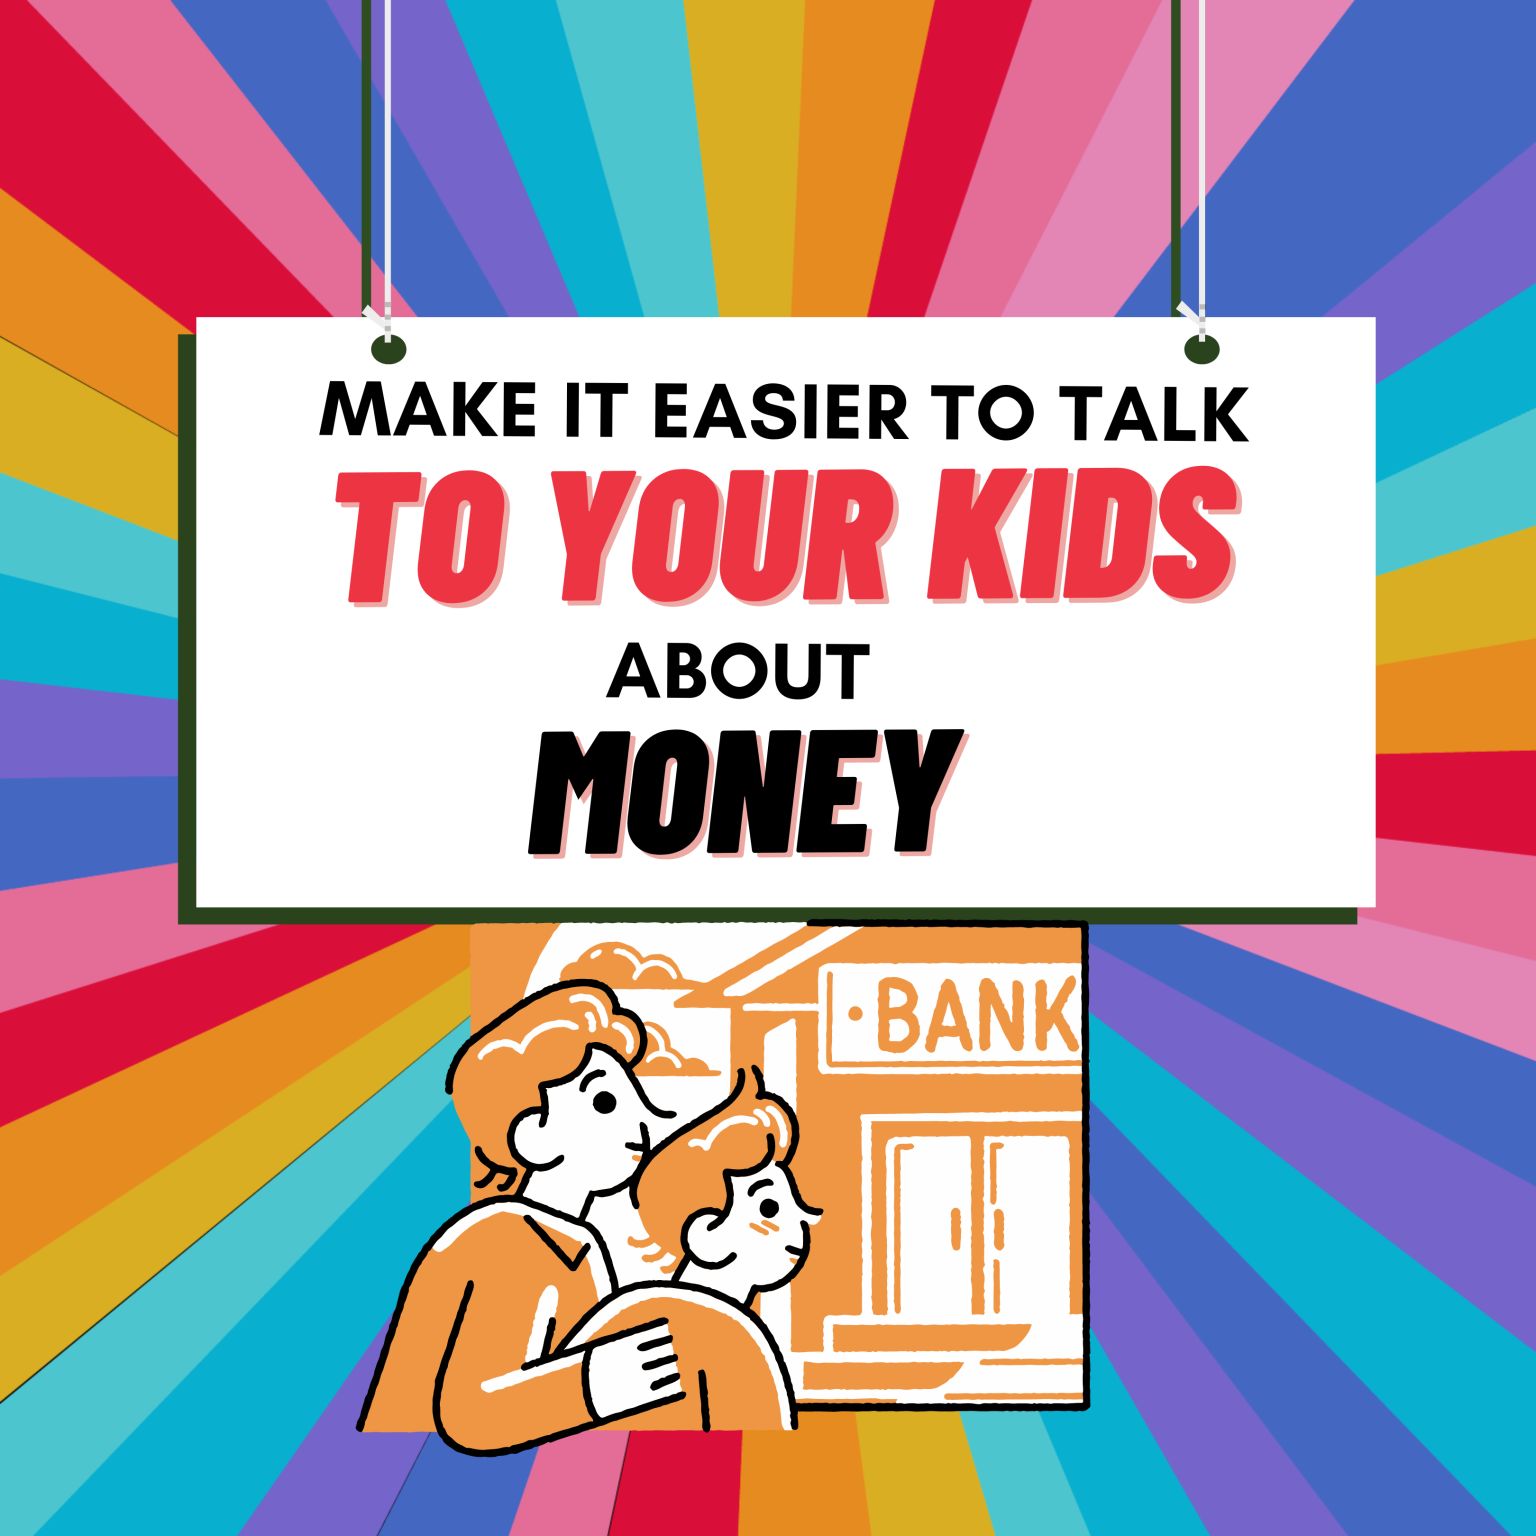 MAKE IT EASIER TO TALK TO YOUR KIDS ABOUT MONEY ​